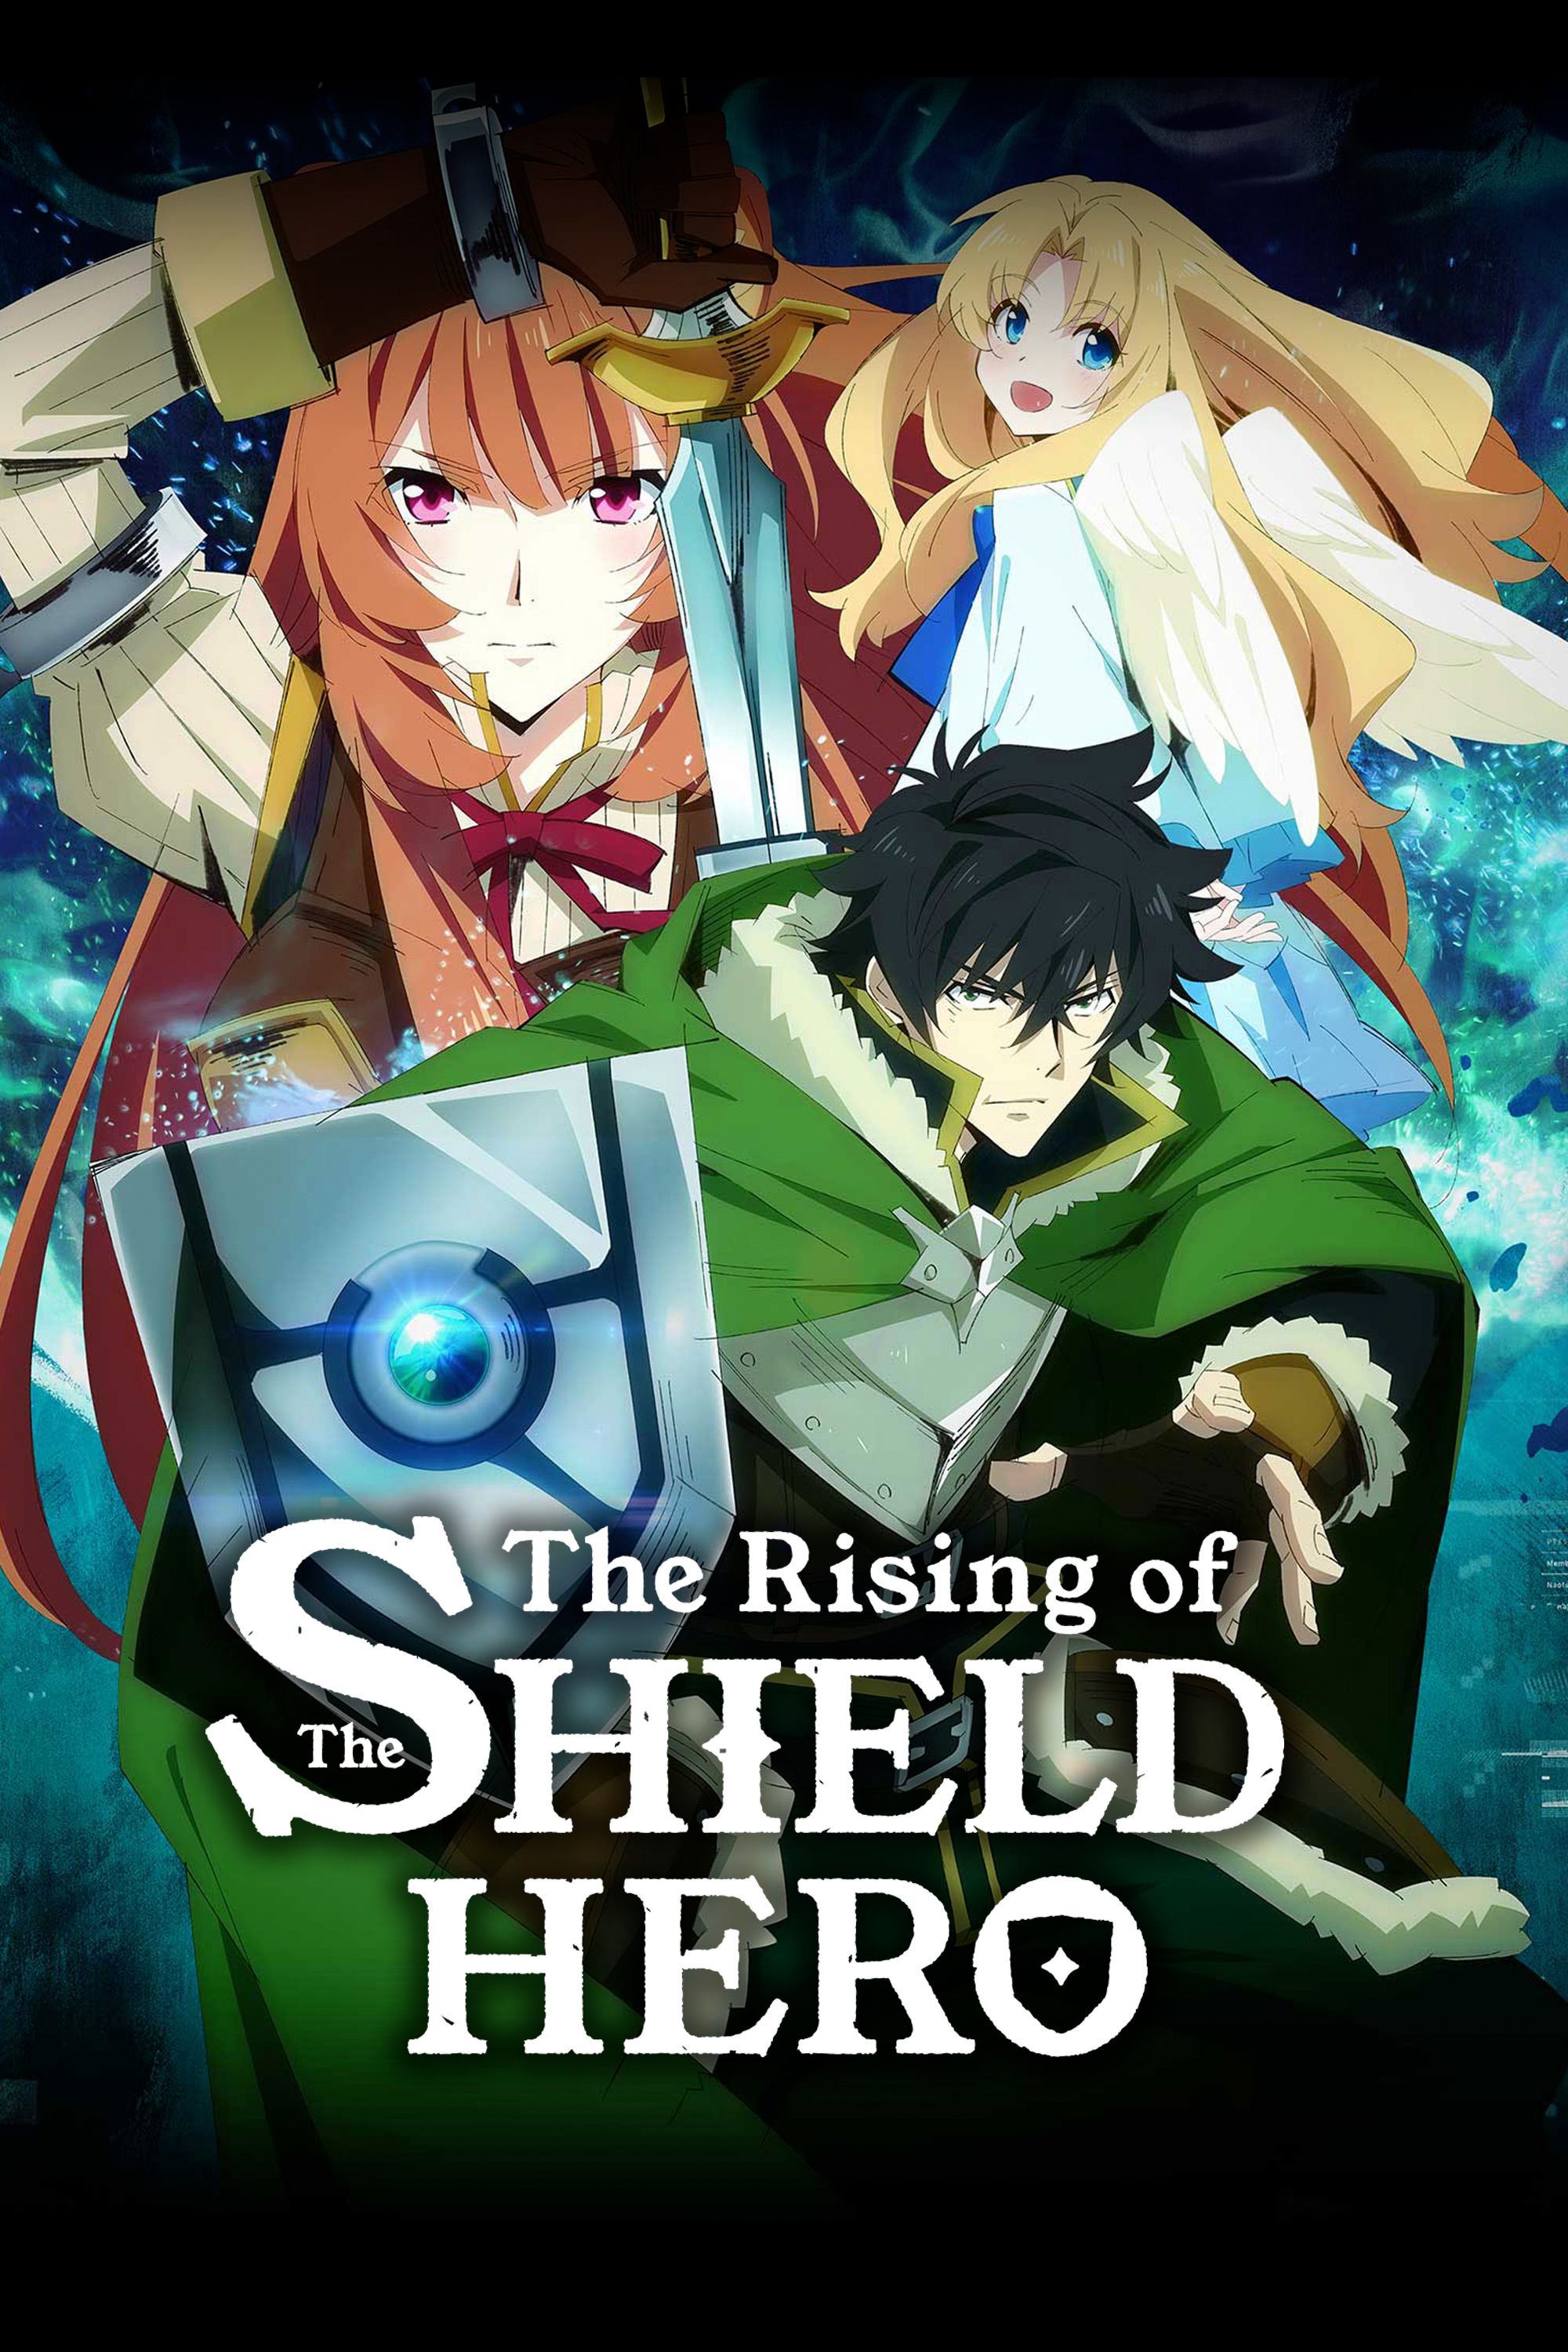 Naofumi And Crew Begin Their Quest To Free Enslaved Demi-Humans In Latest  Trailer For 'The Rising of the Shield Hero' Season 3 - Bounding Into Comics